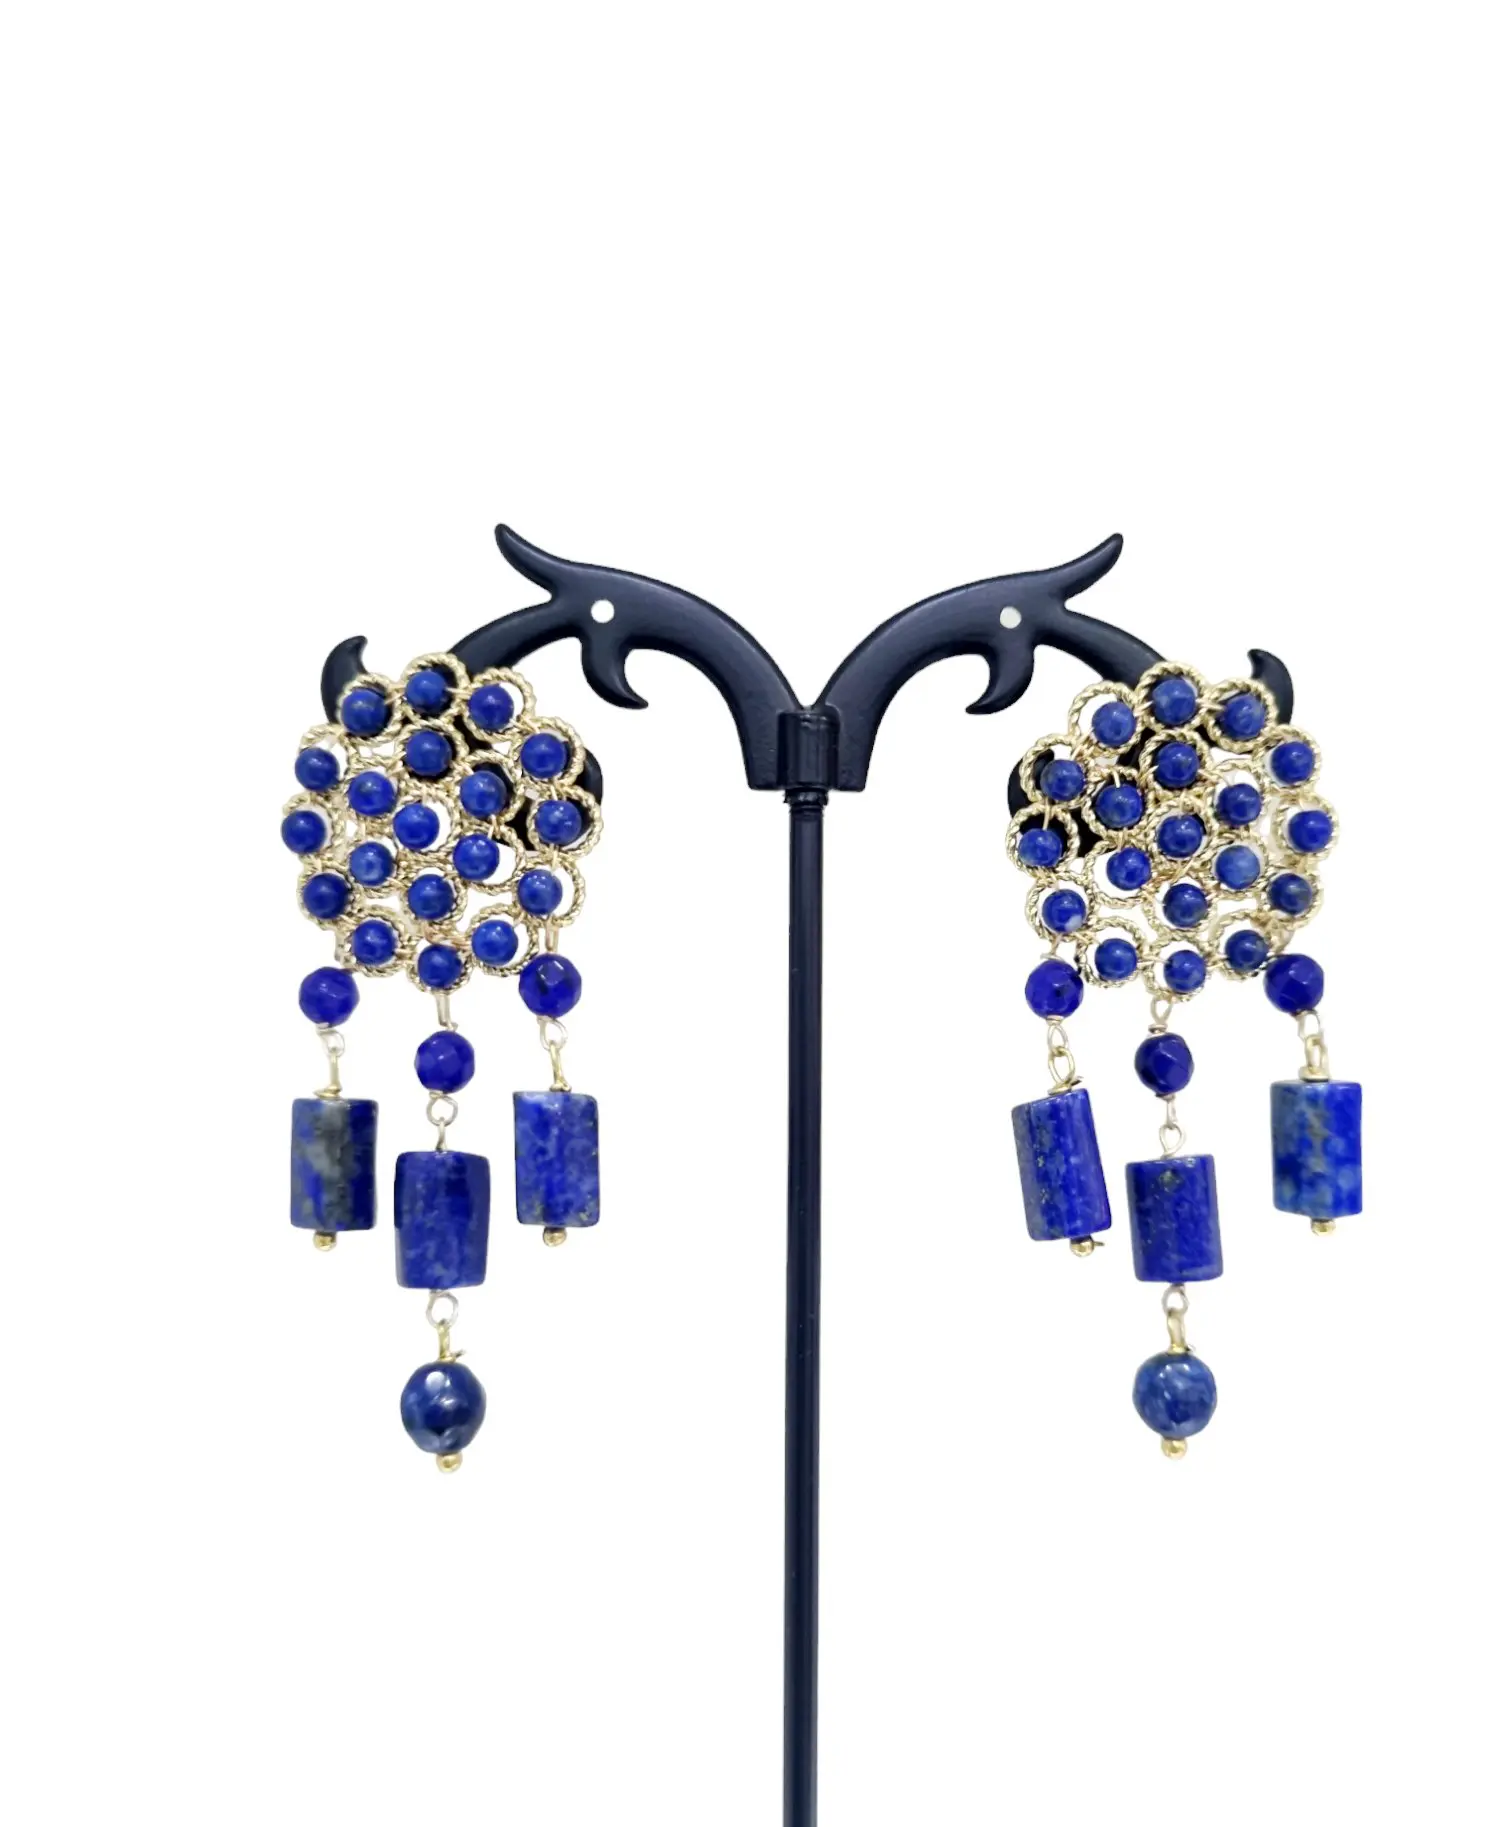 Lapis lazuli and blue agate earrings – Length 5cm – Weight 6g